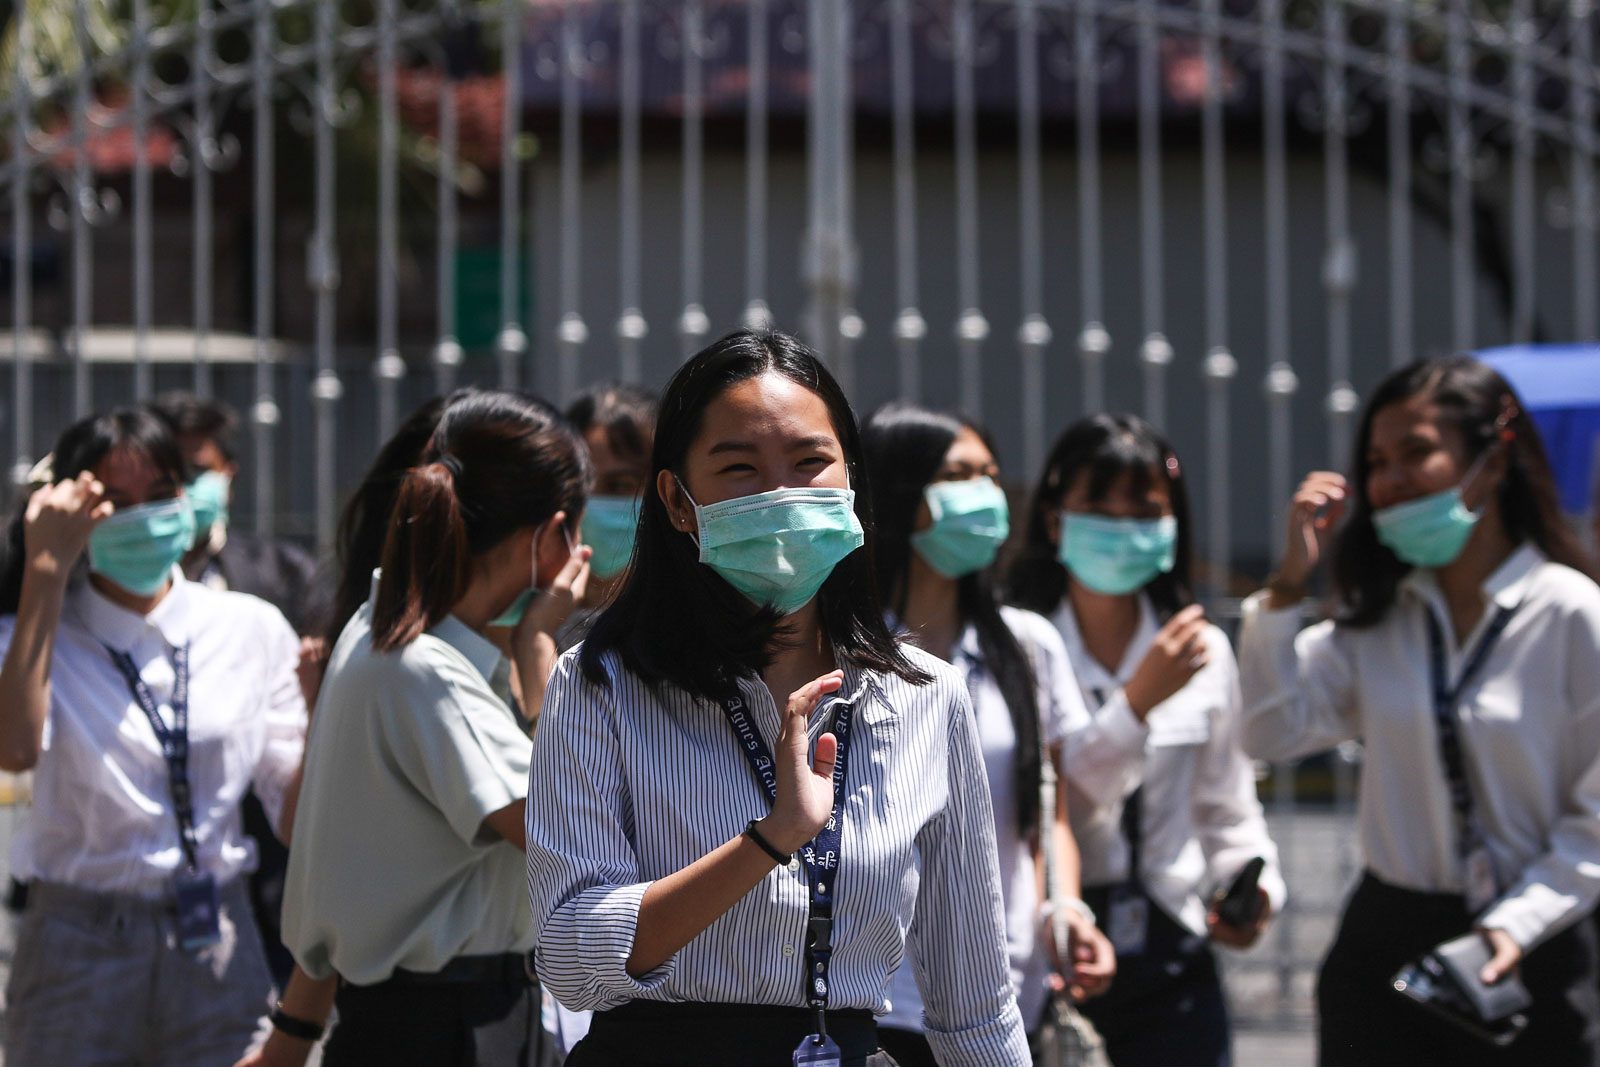 TAKING PRECAUTIONS. People in Manila wear face masks as a precautionary measure against the novel coronavirus on March 9, 2020. Photo by KD Madrilejos/Rappler 